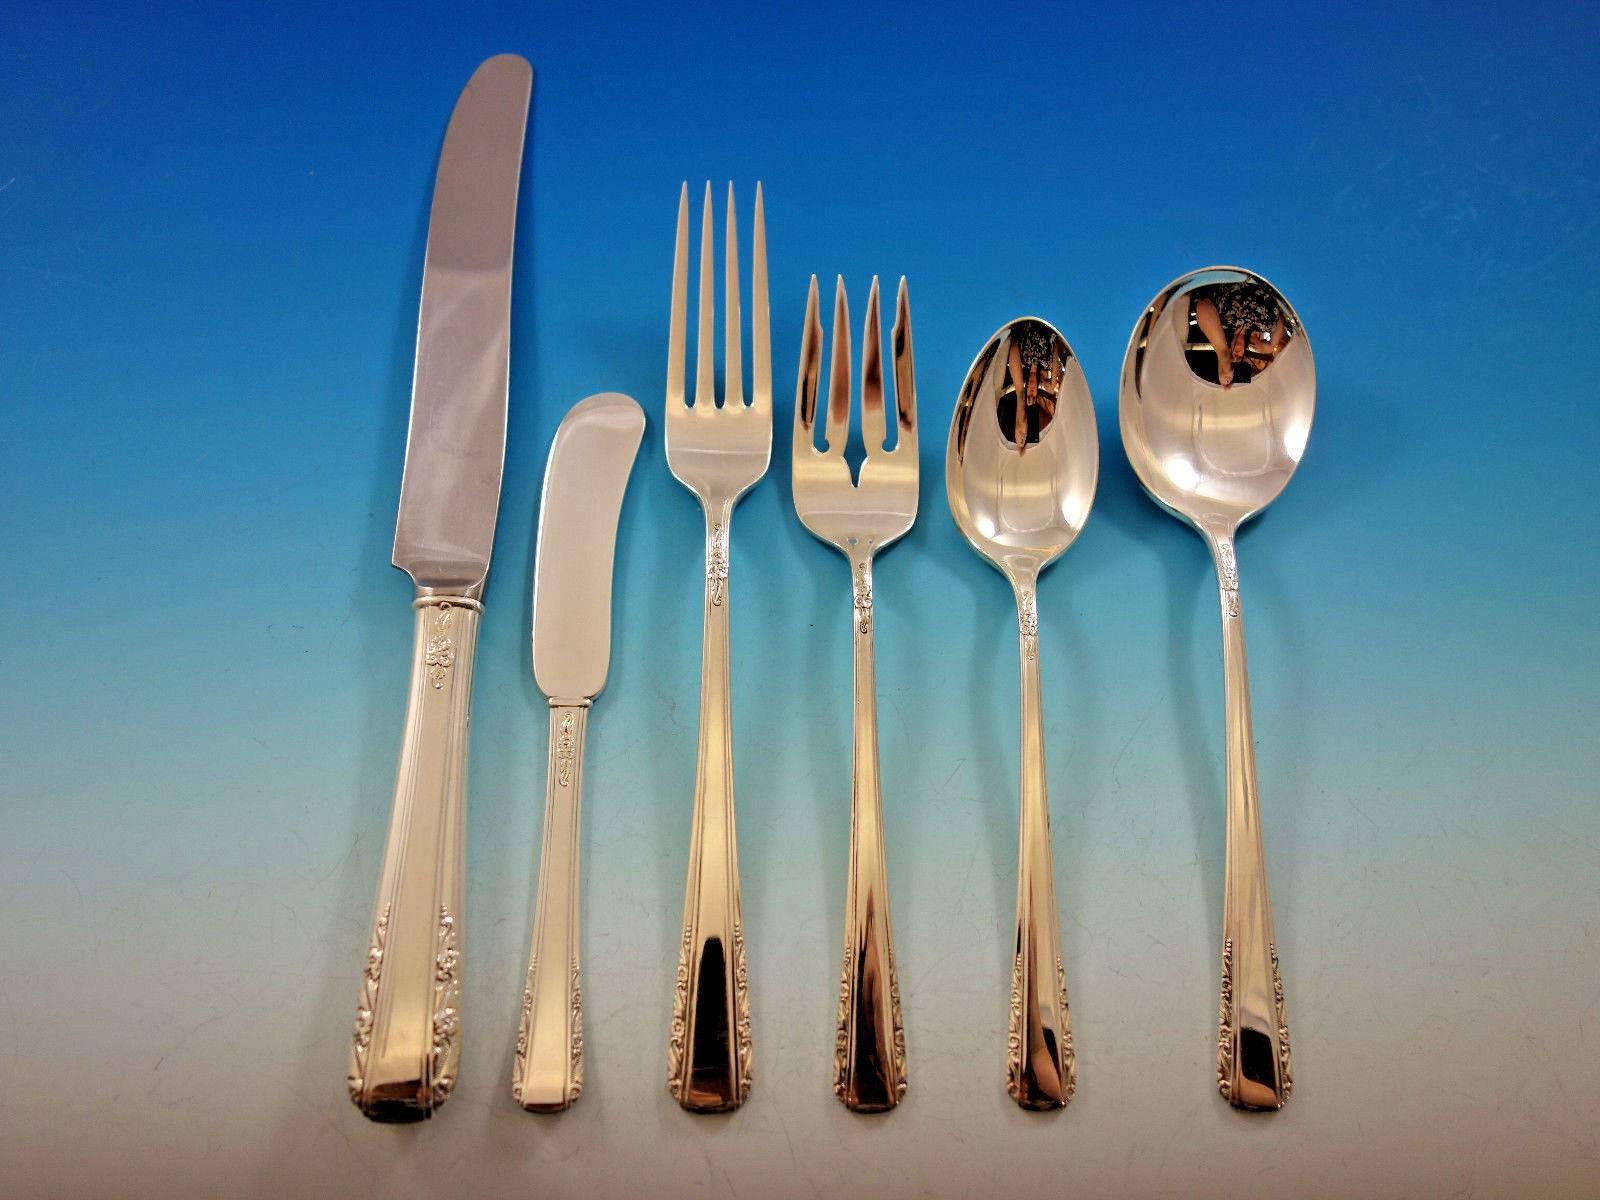 Courtship by International sterling silver flatware set of 54 pieces. This set includes: 

Eight knives, 9